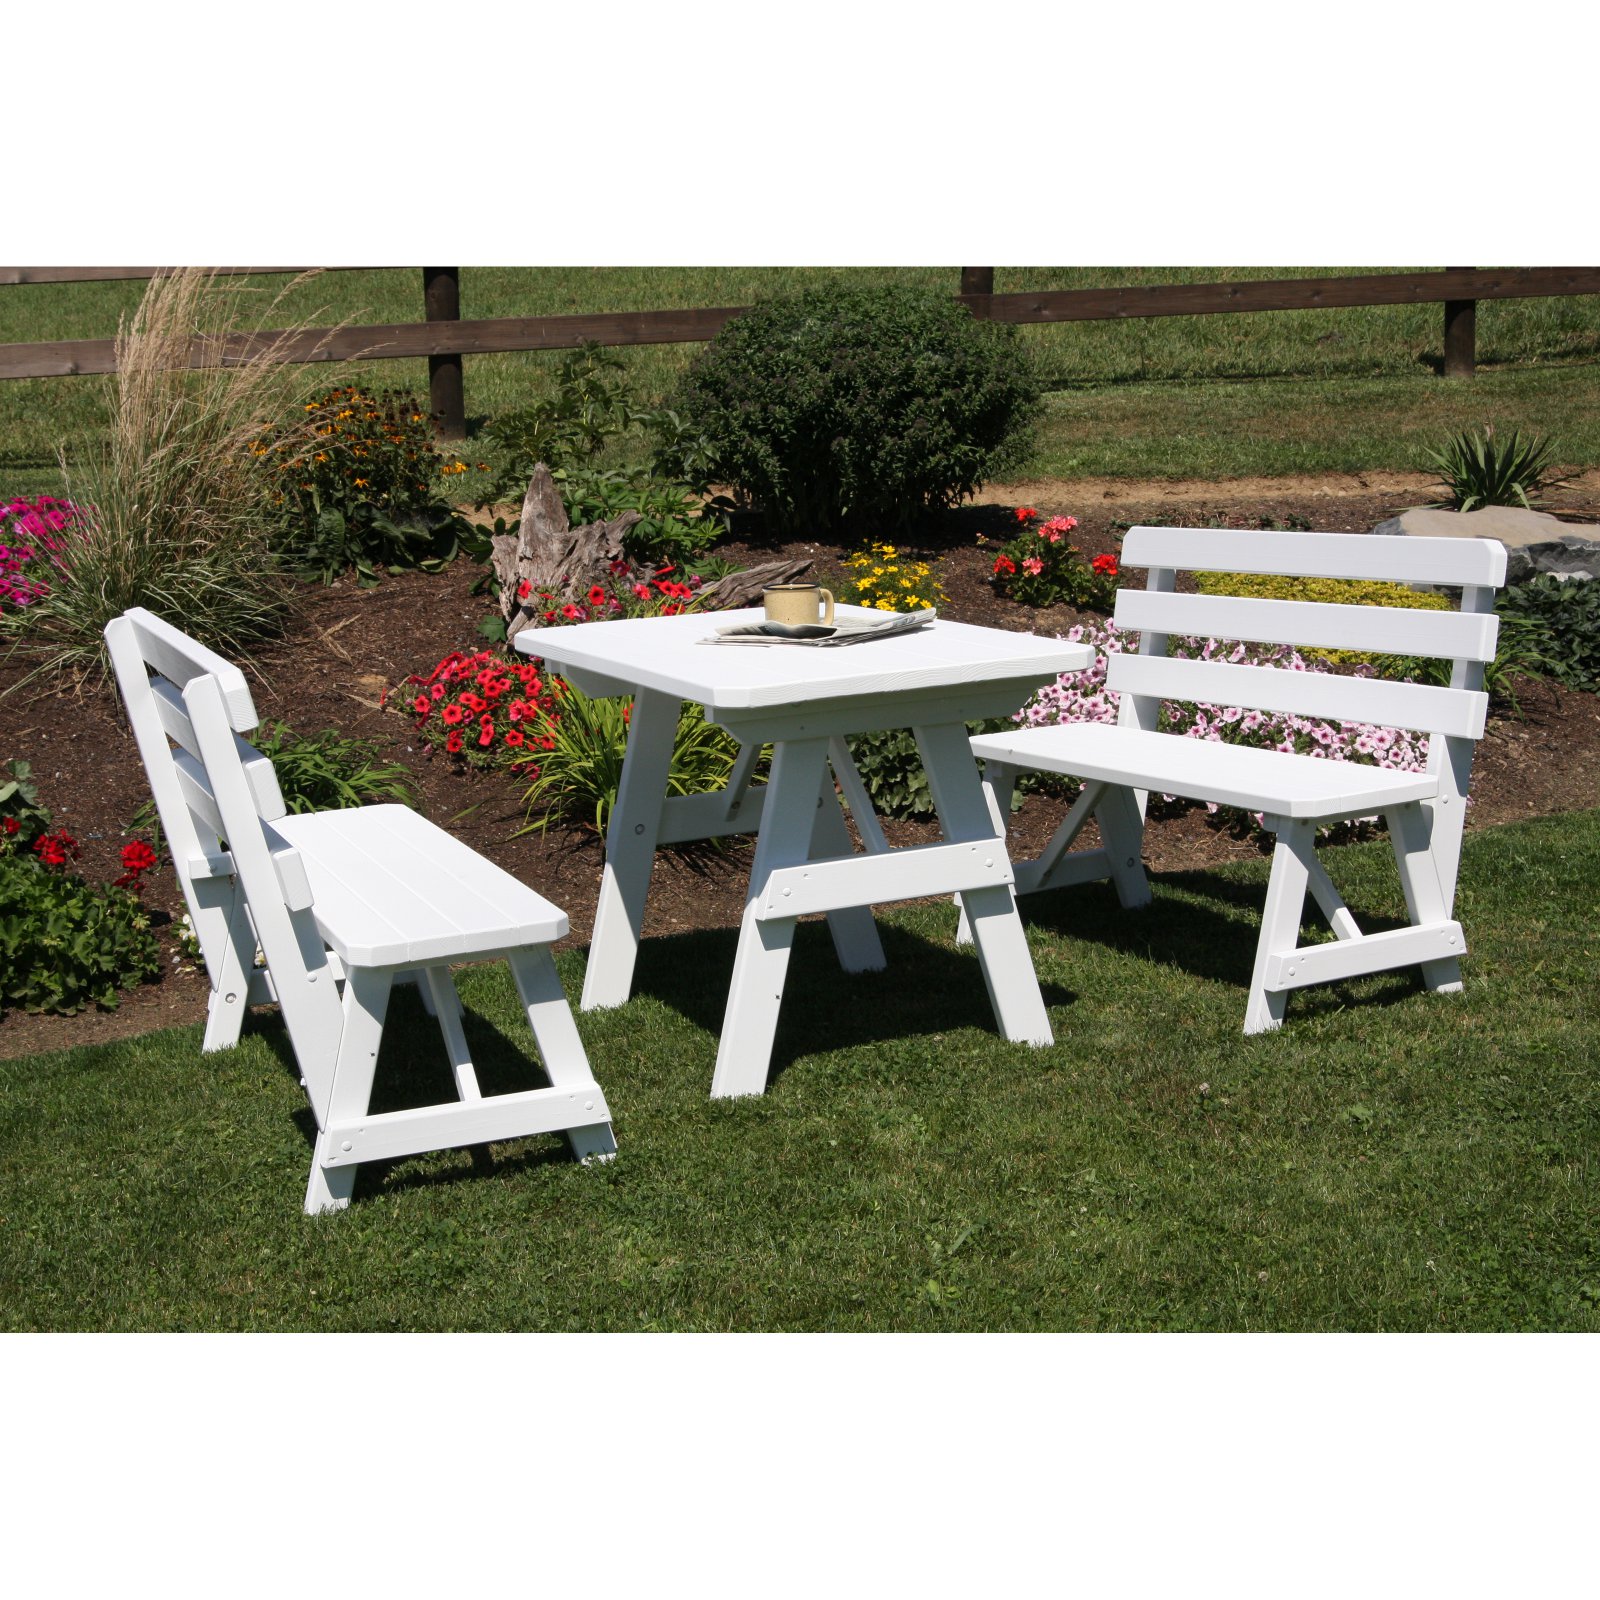 A &amp; L Furniture Yellow Pine Couples Picnic Table with 2 Backed Benches - image 1 of 2